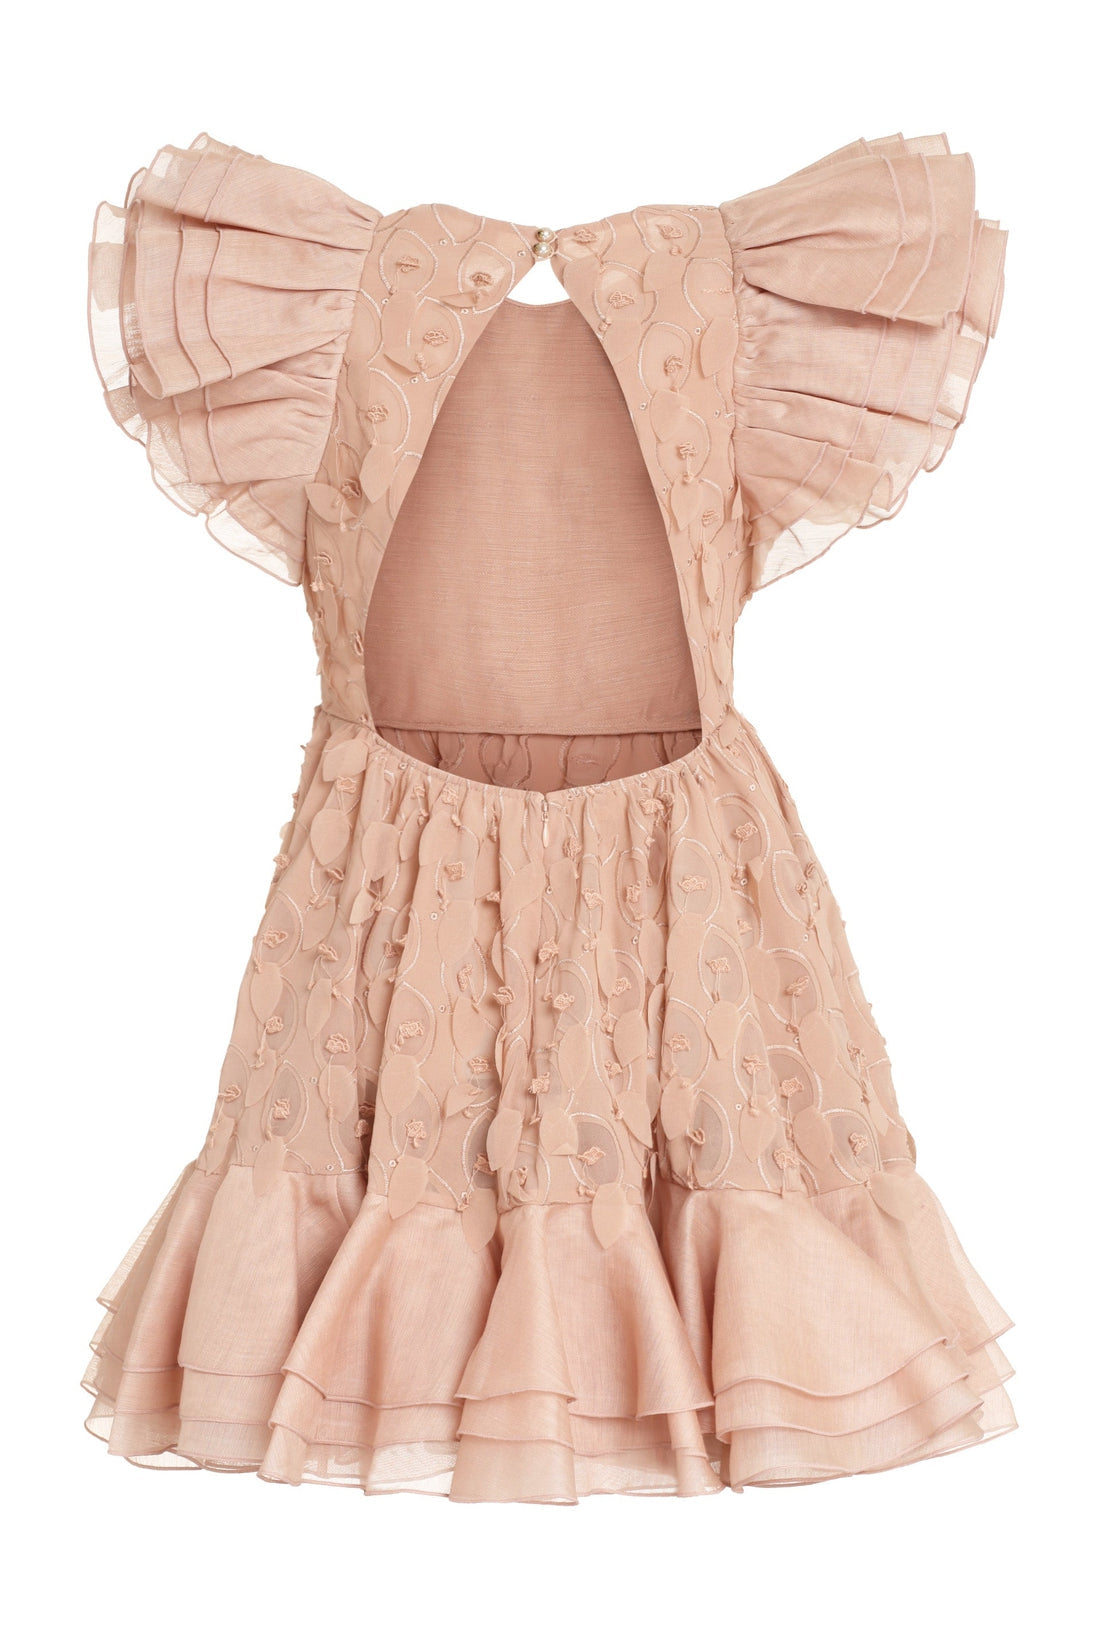 Zimmermann-OUTLET-SALE-Embroidered mini dress-ARCHIVIST